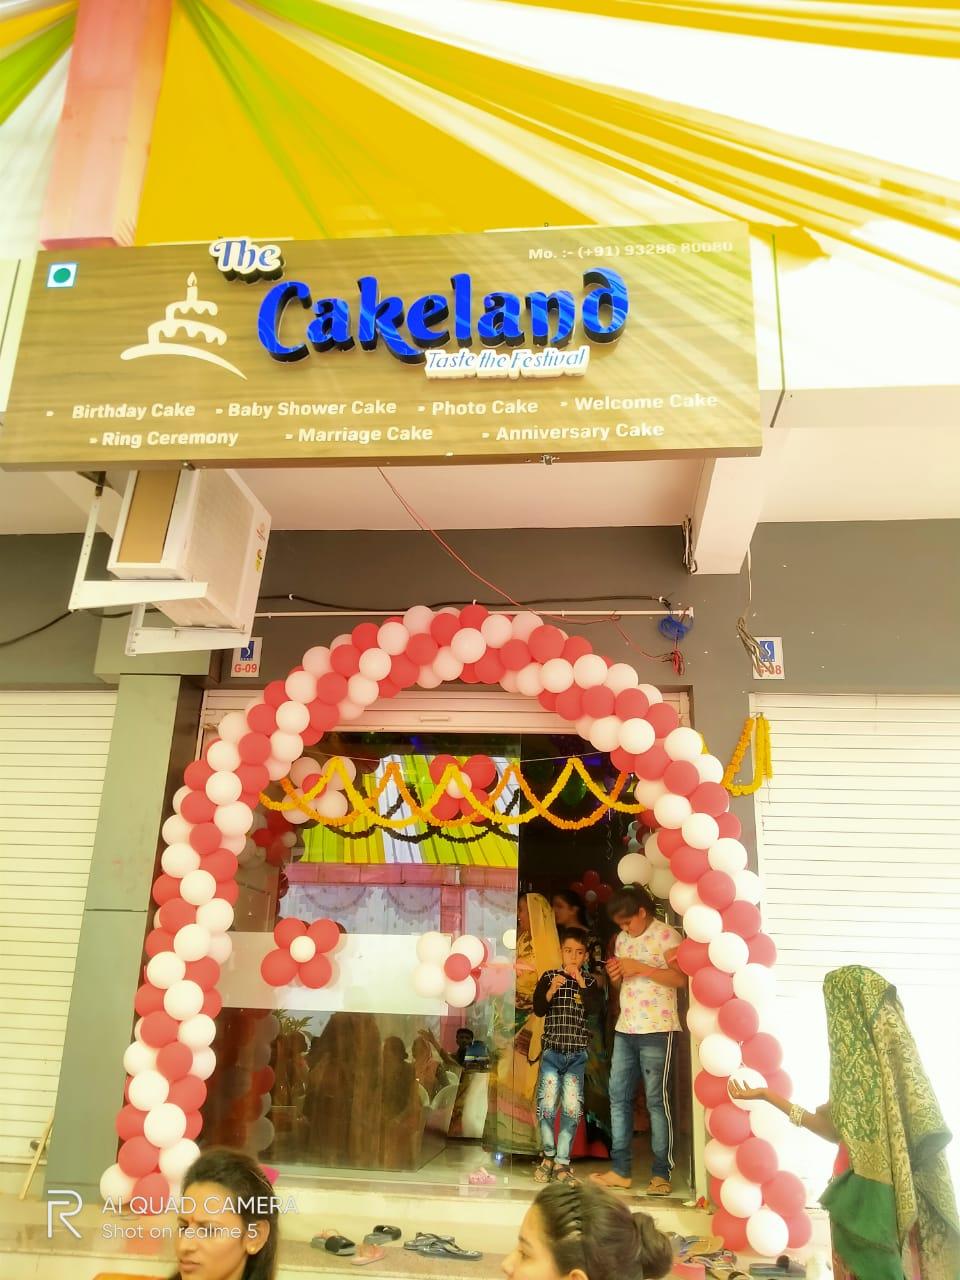 Welcome to cakeland